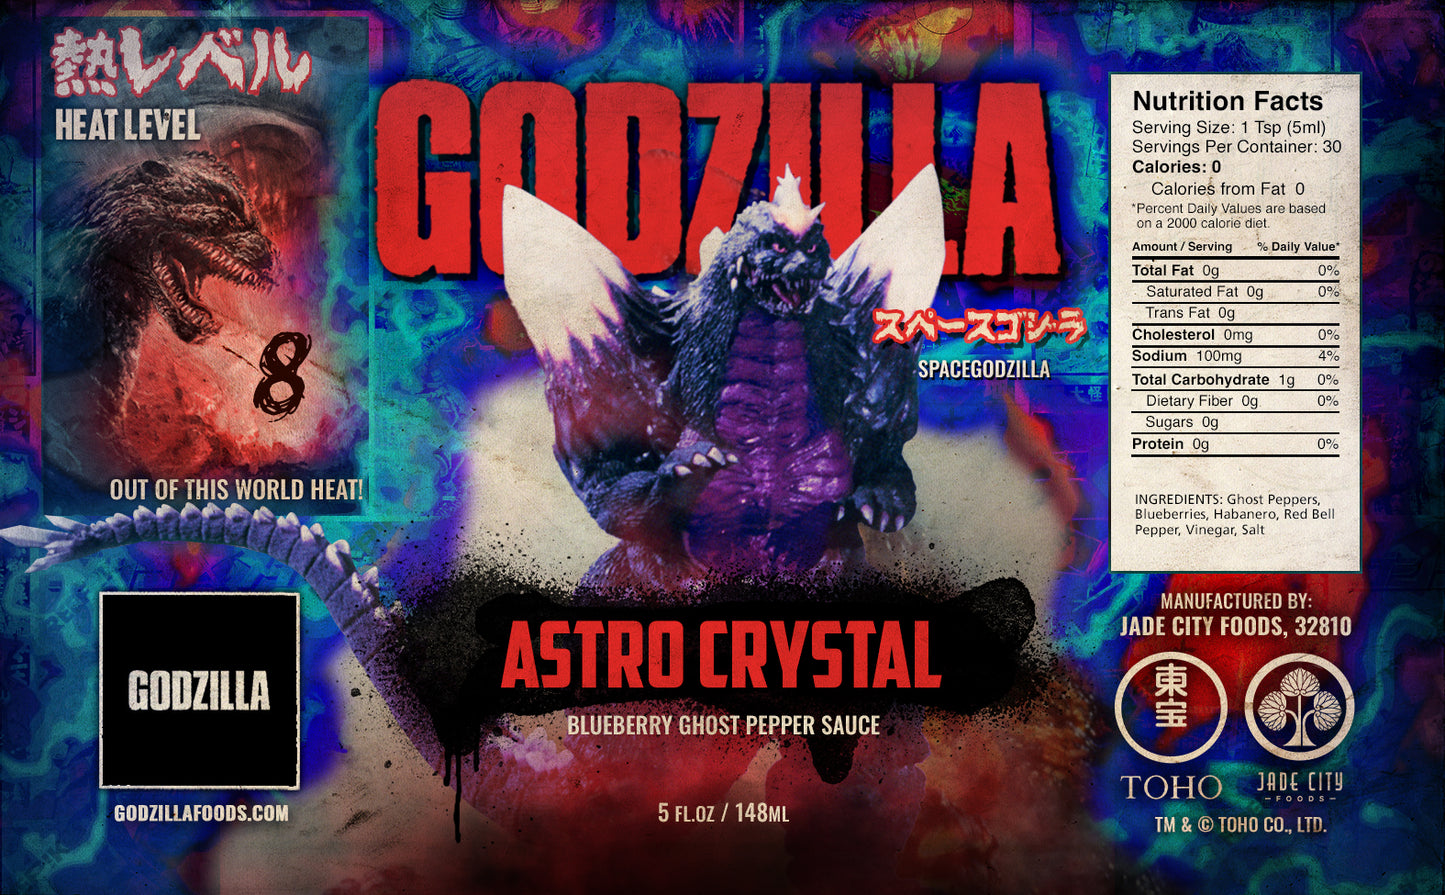 SpaceGodzilla's Astro Crystal: Blueberry Ghost Pepper Sauce